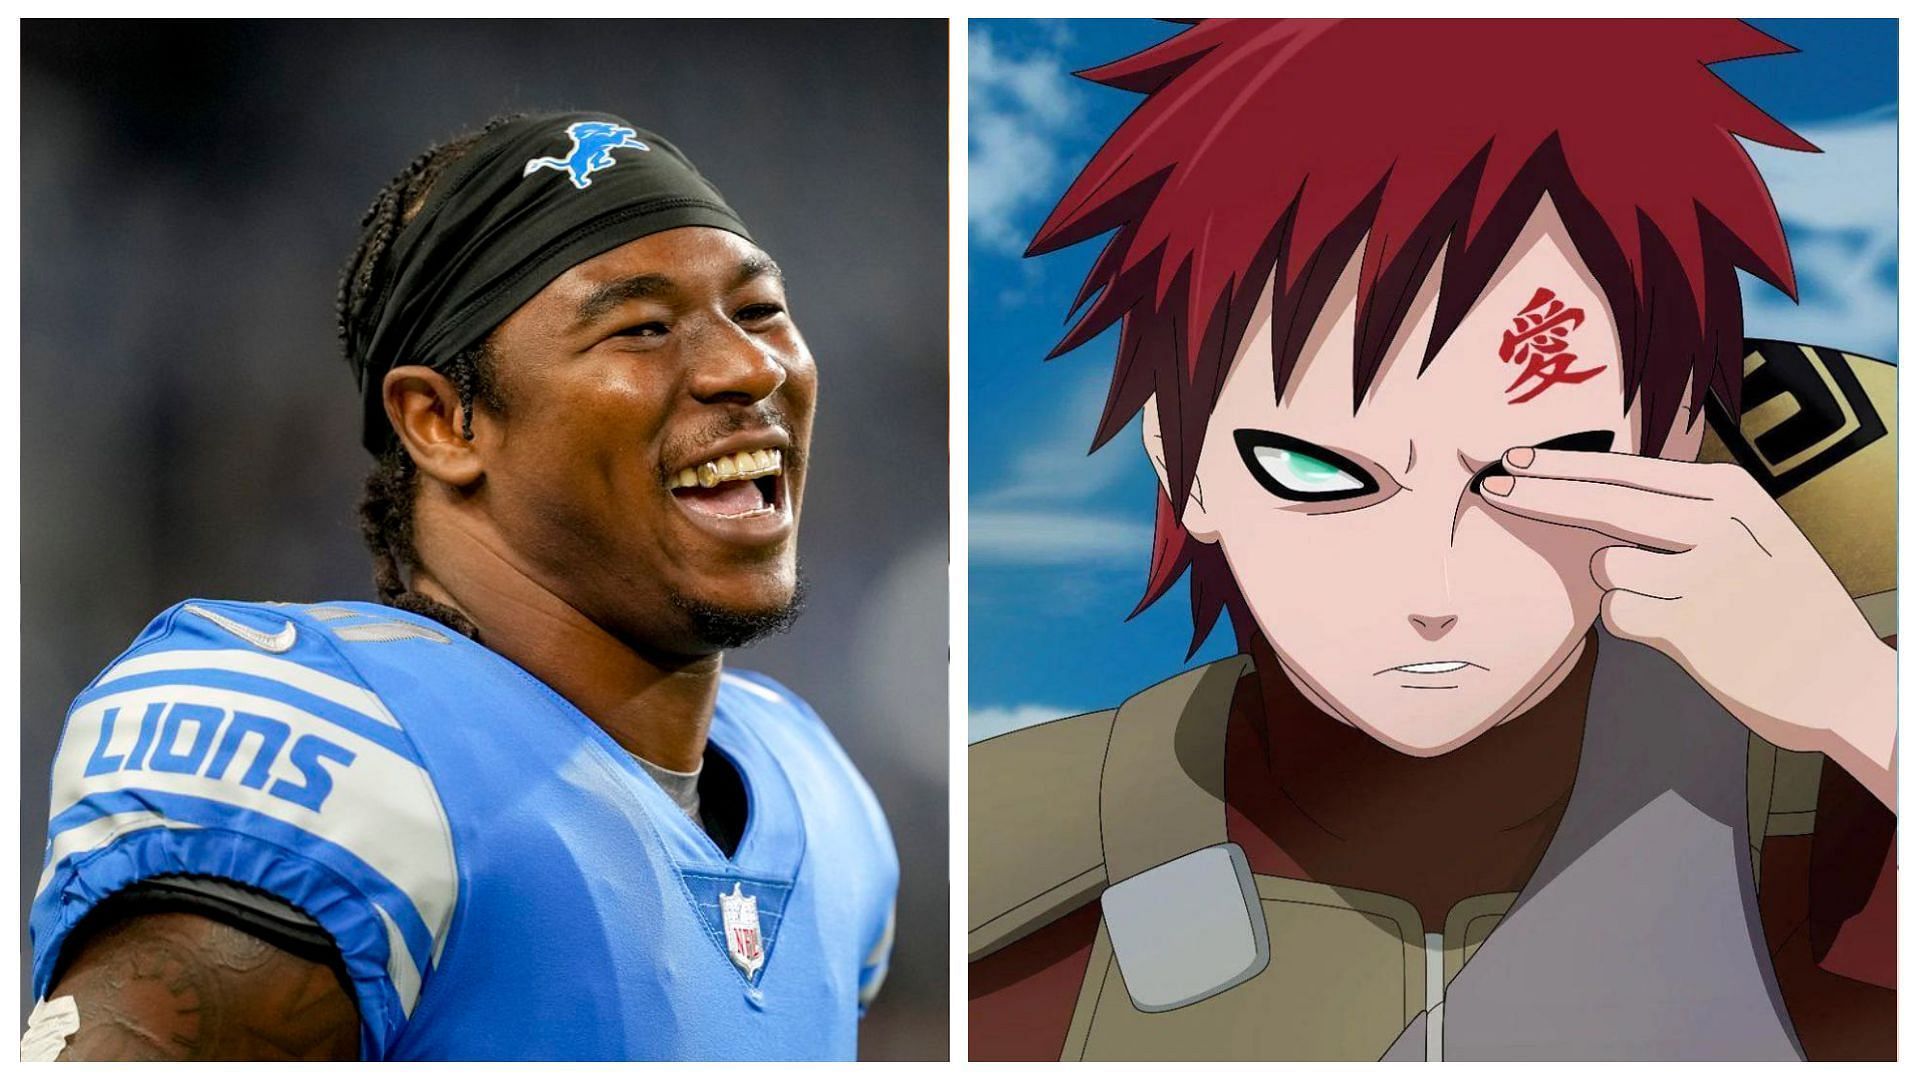 Fans love NFL star's anime-inspired player introduction as 'Swag Kazekage'  | KDBC